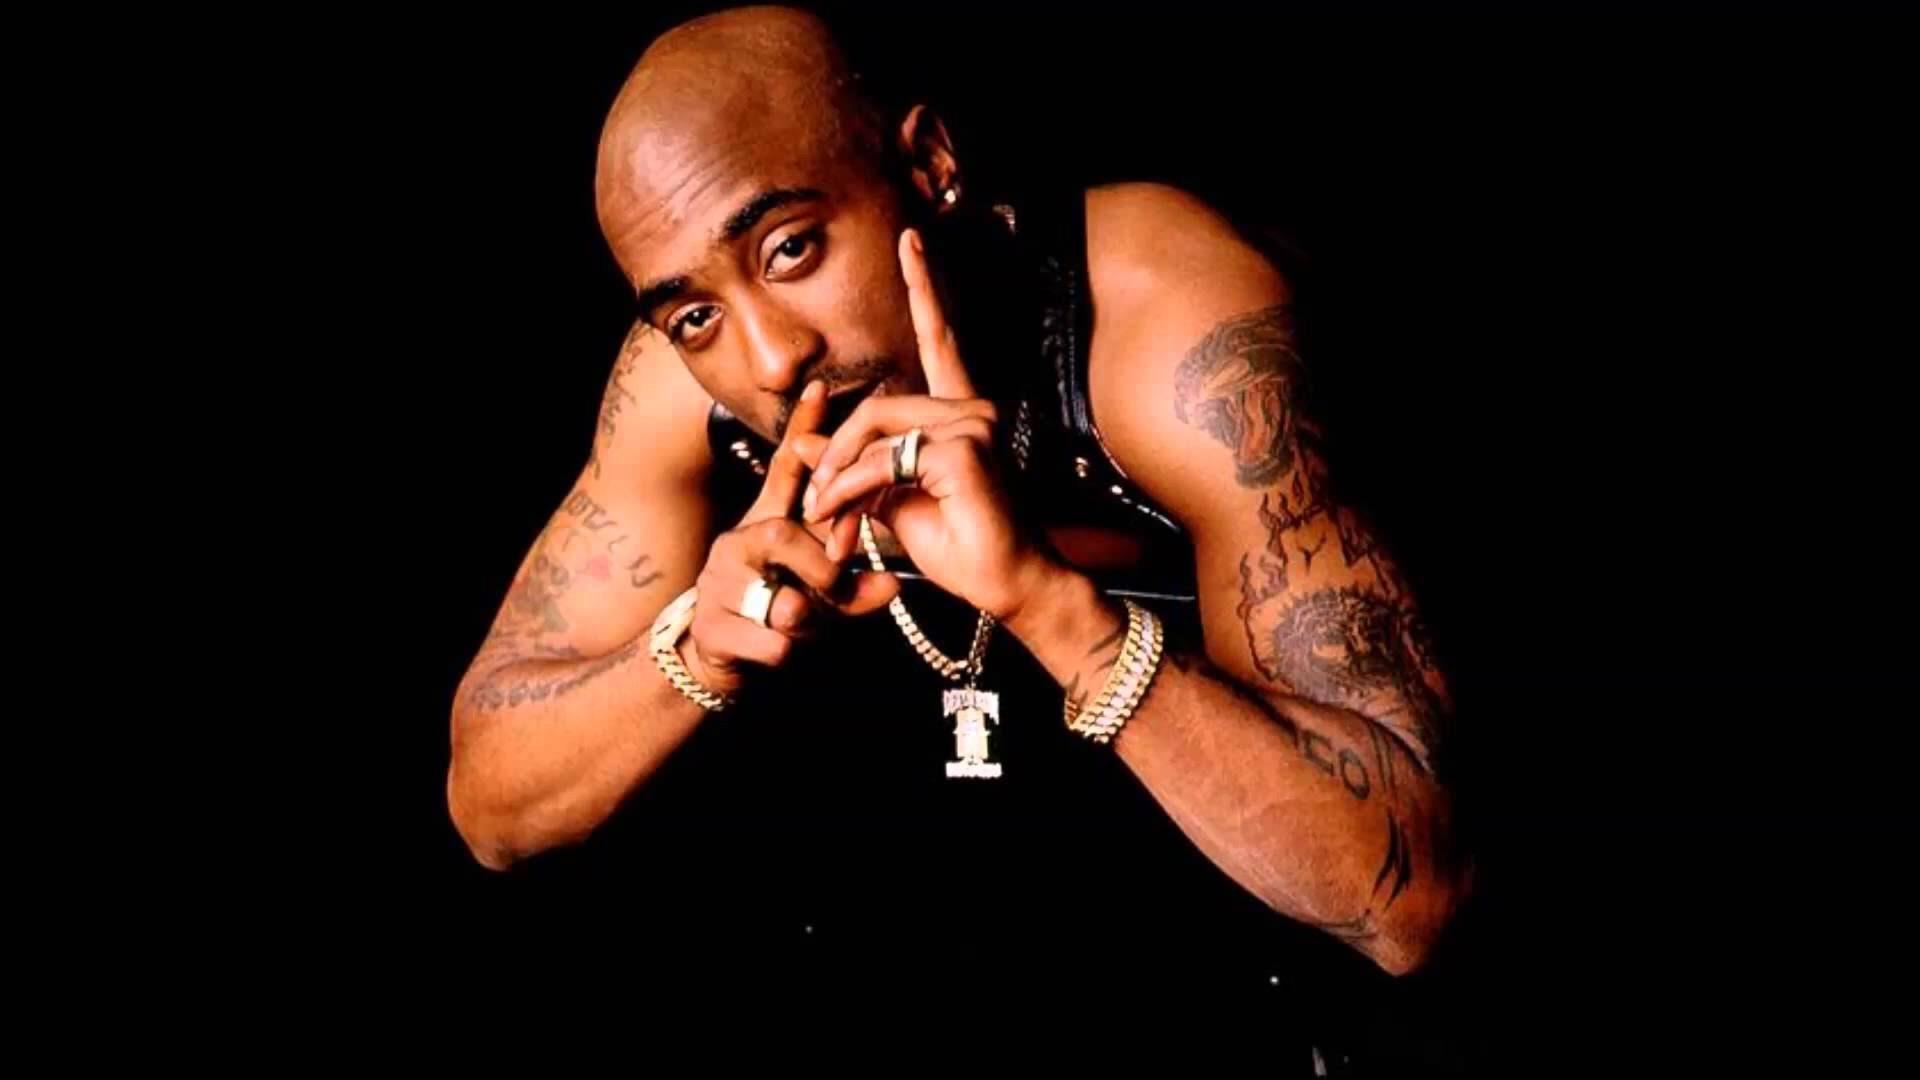 REQUEST 2pac with or without text of the All Eyez On Me album artwork